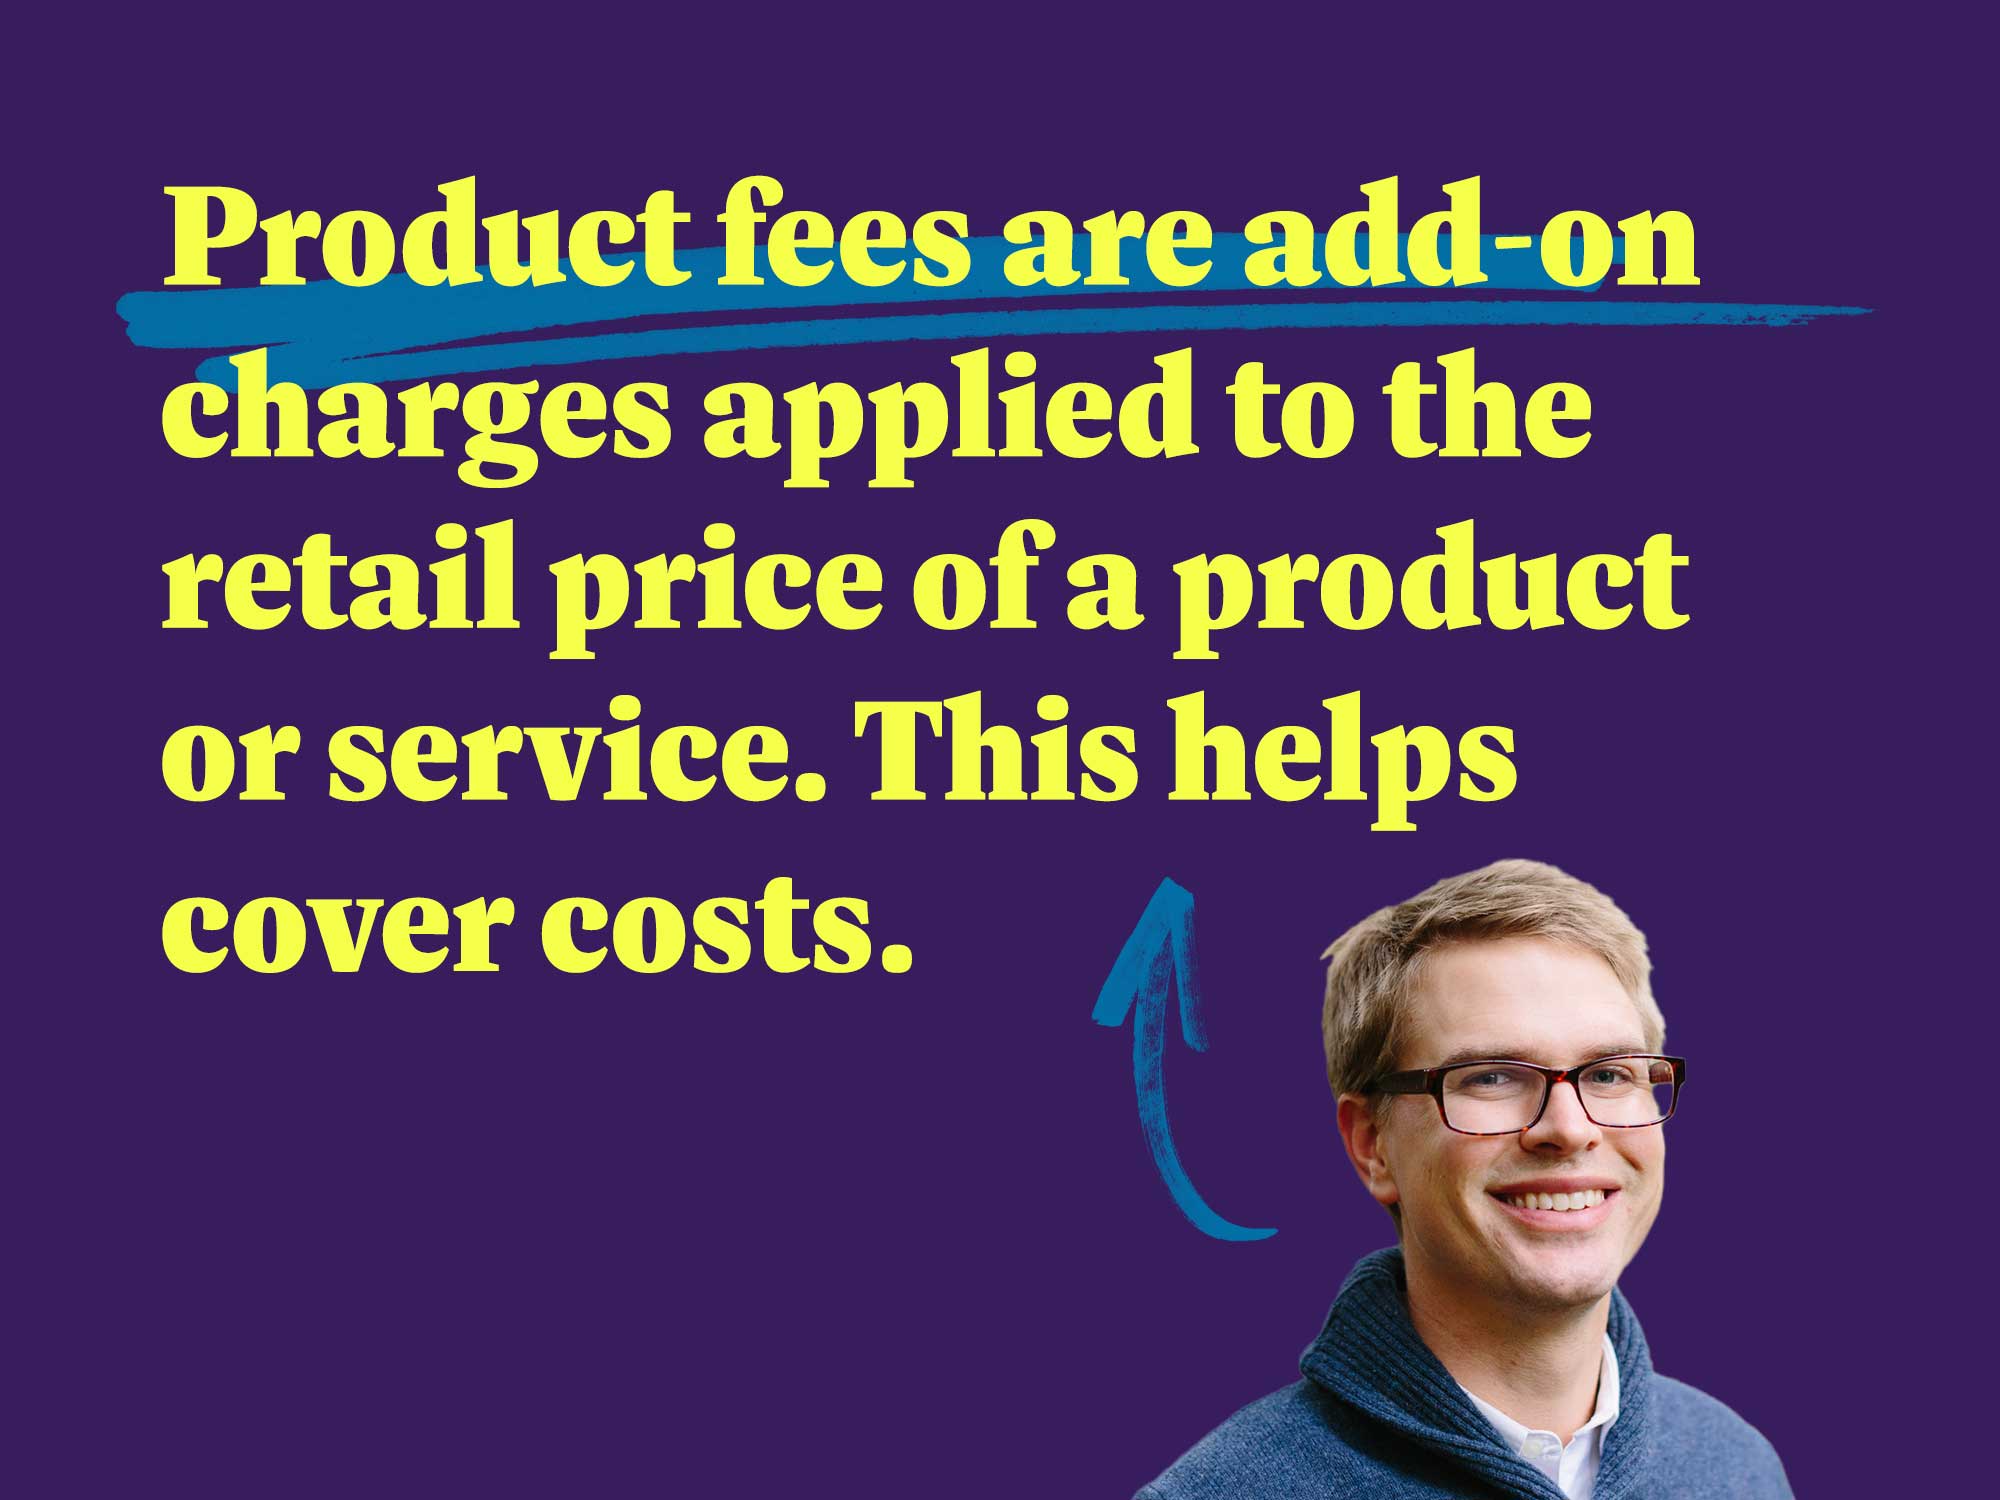 Product fees are add-on charges applied to the retail price of a product or service. This helps cover costs.